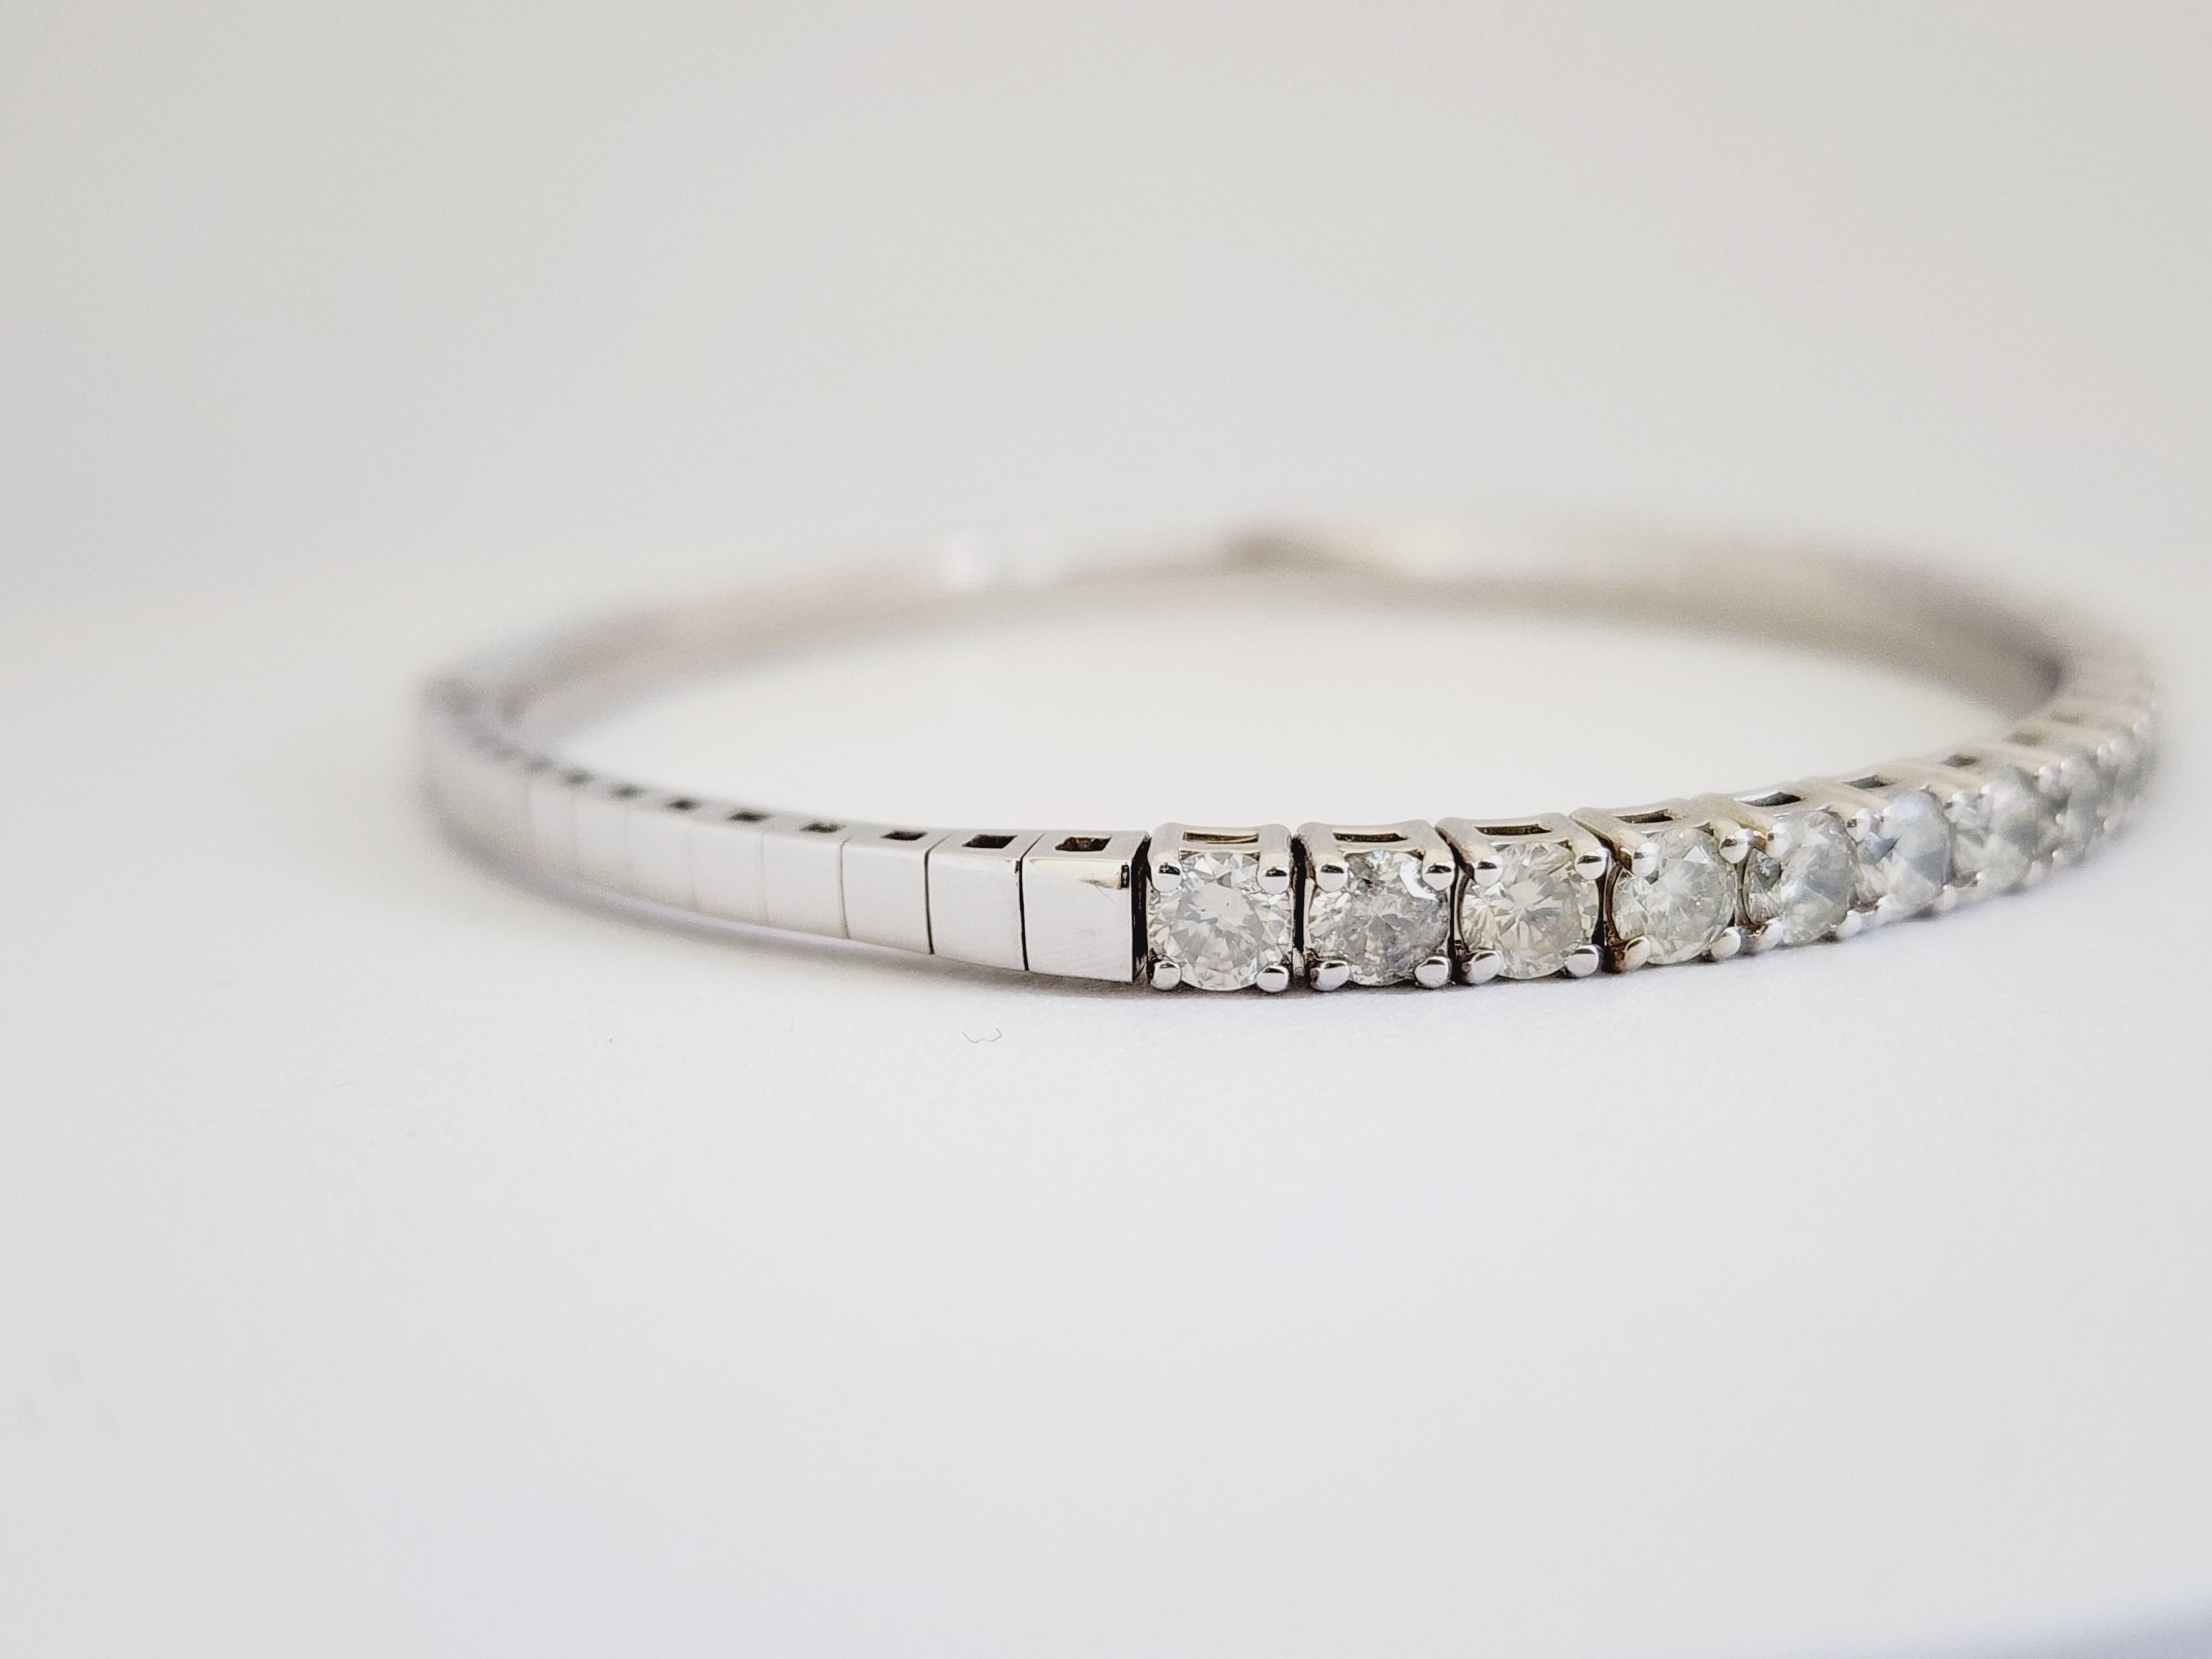 Natural Diamonds 4.15 ctw flexible half way around bangle white gold 14k 7 Inch. Average Color H Clarity I, 3.7 mm wide.